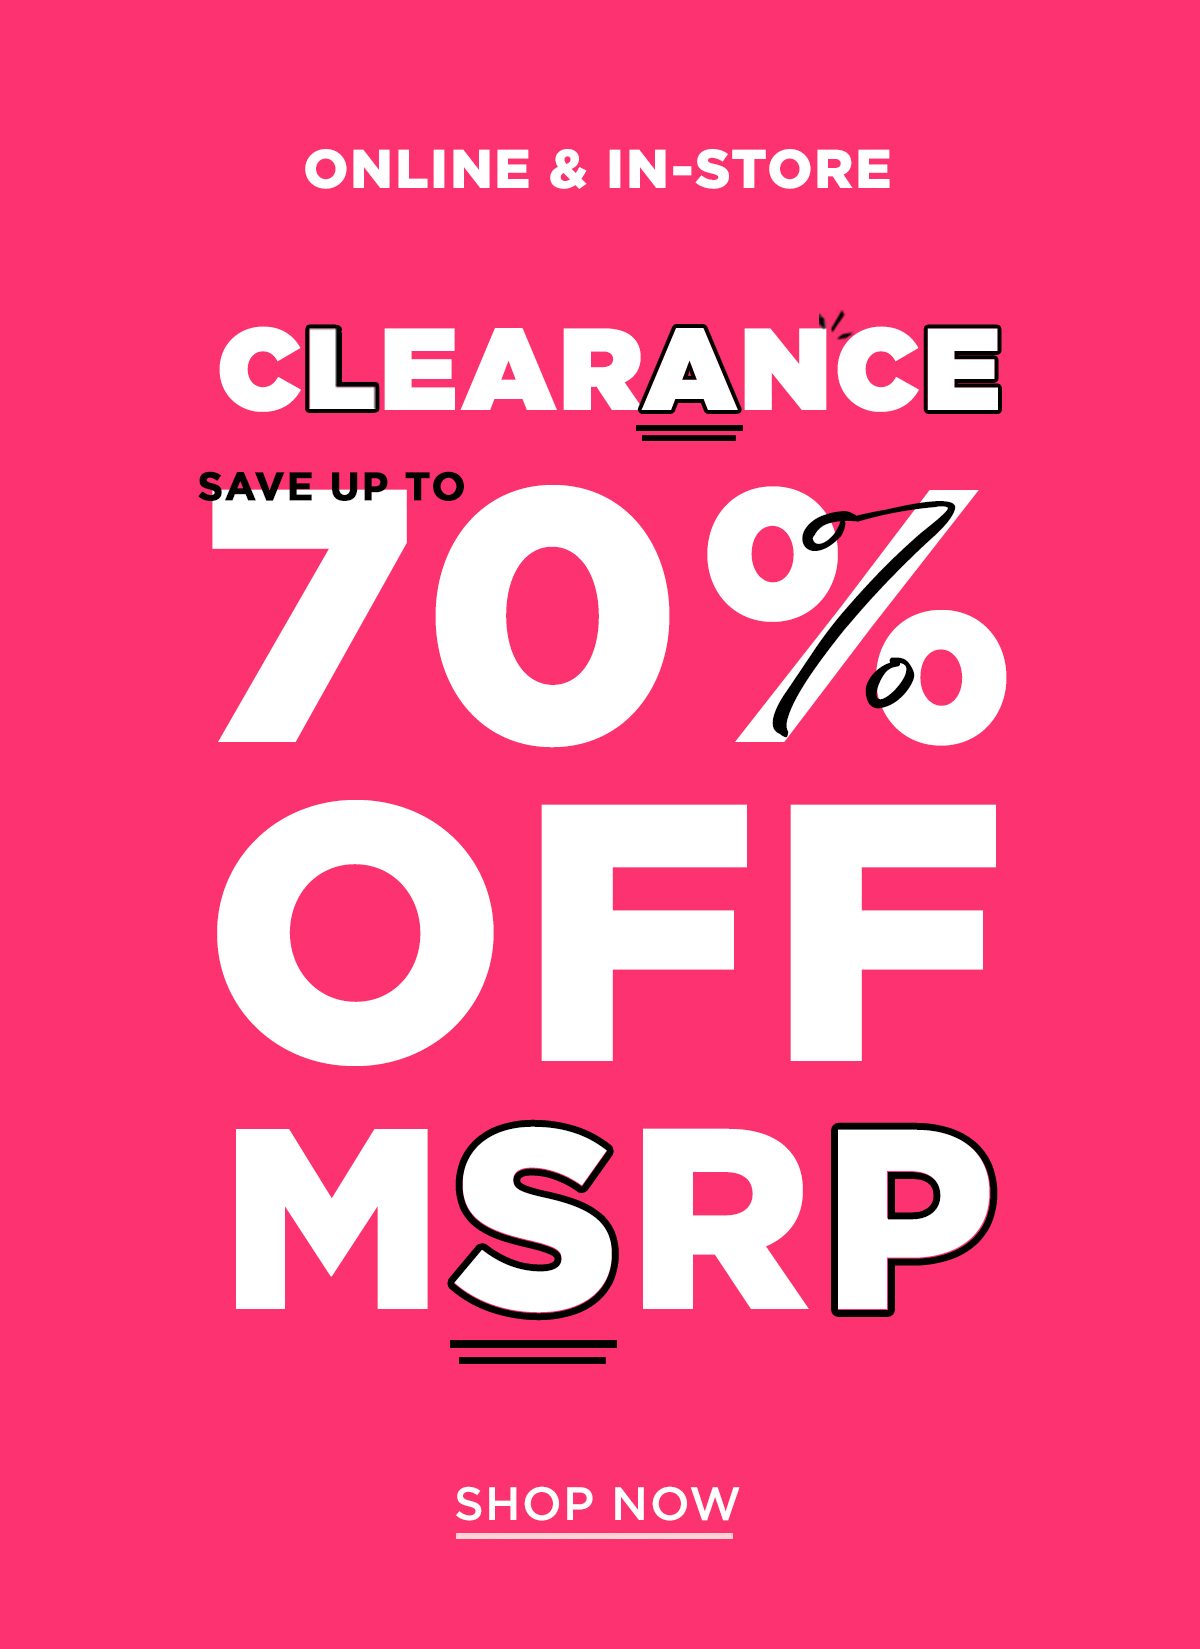 Online & In-Store Clearance Save Up 70% Off MSRP - Show Now